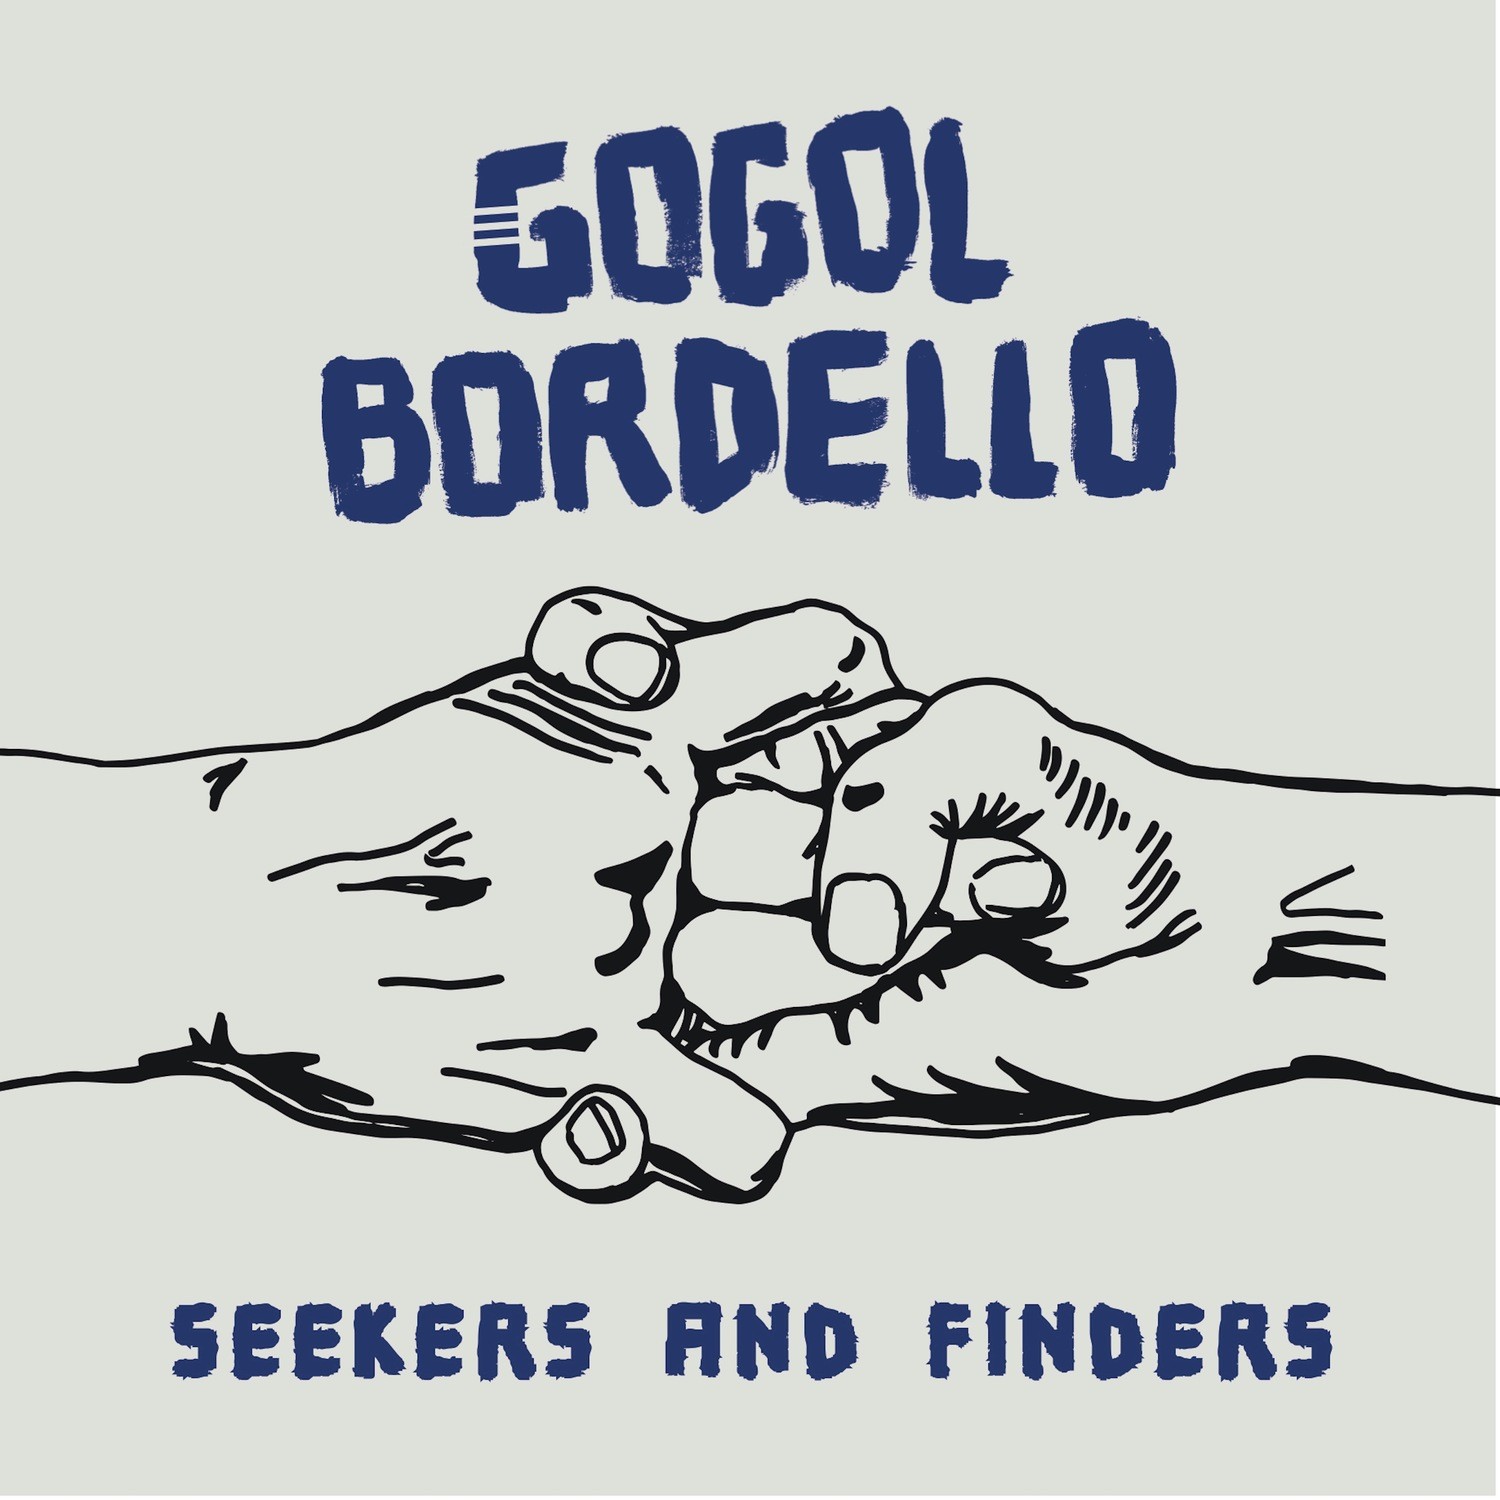 Gogol Bordello - Seekers And Finders LP